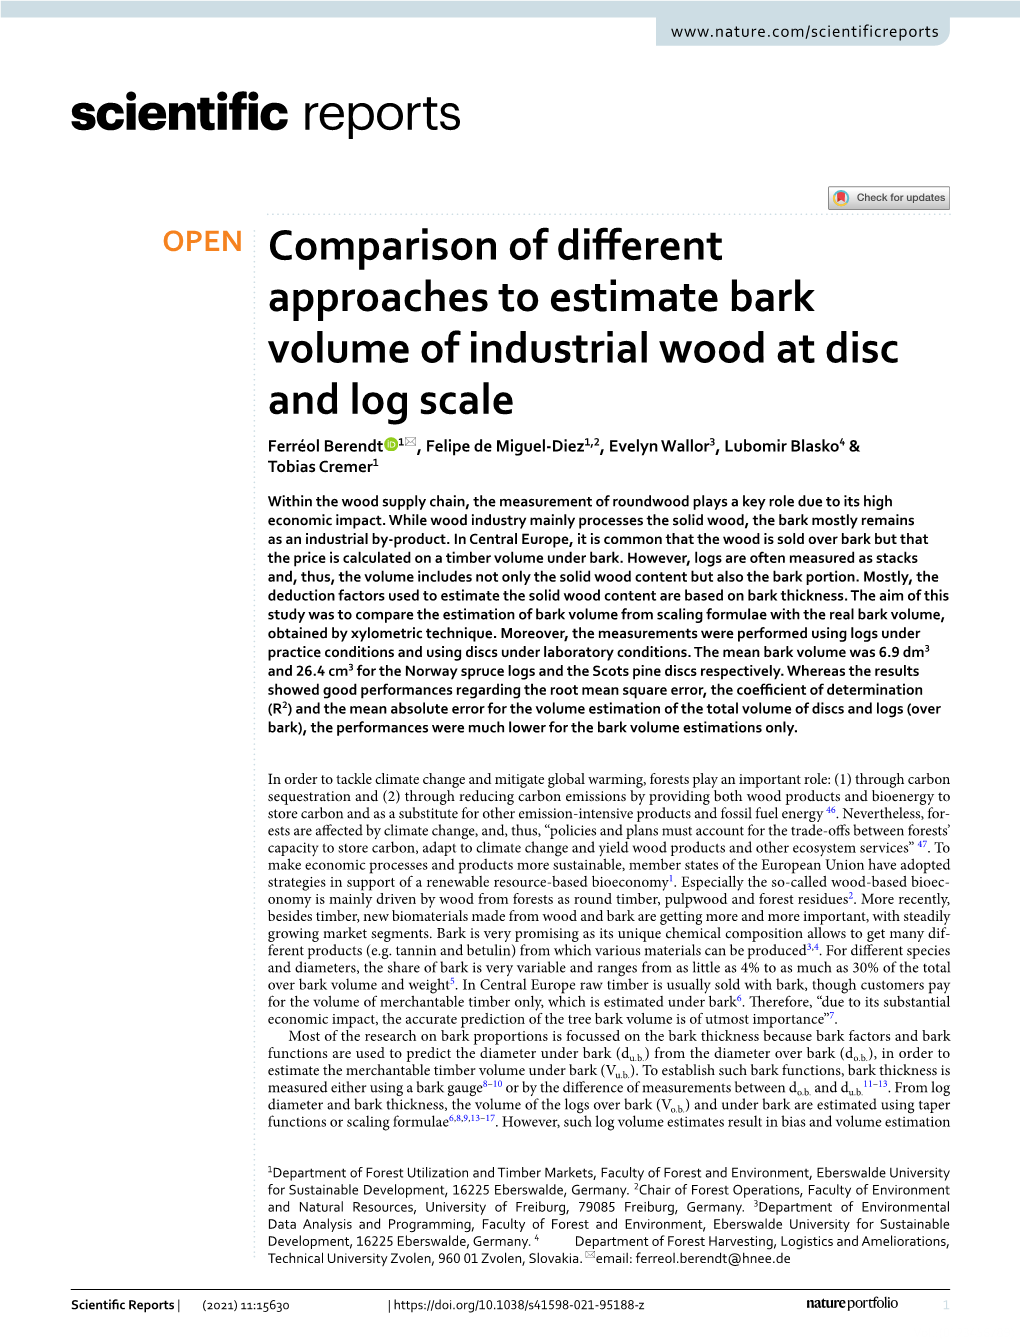 Comparison of Different Approaches to Estimate Bark Volume of Industrial